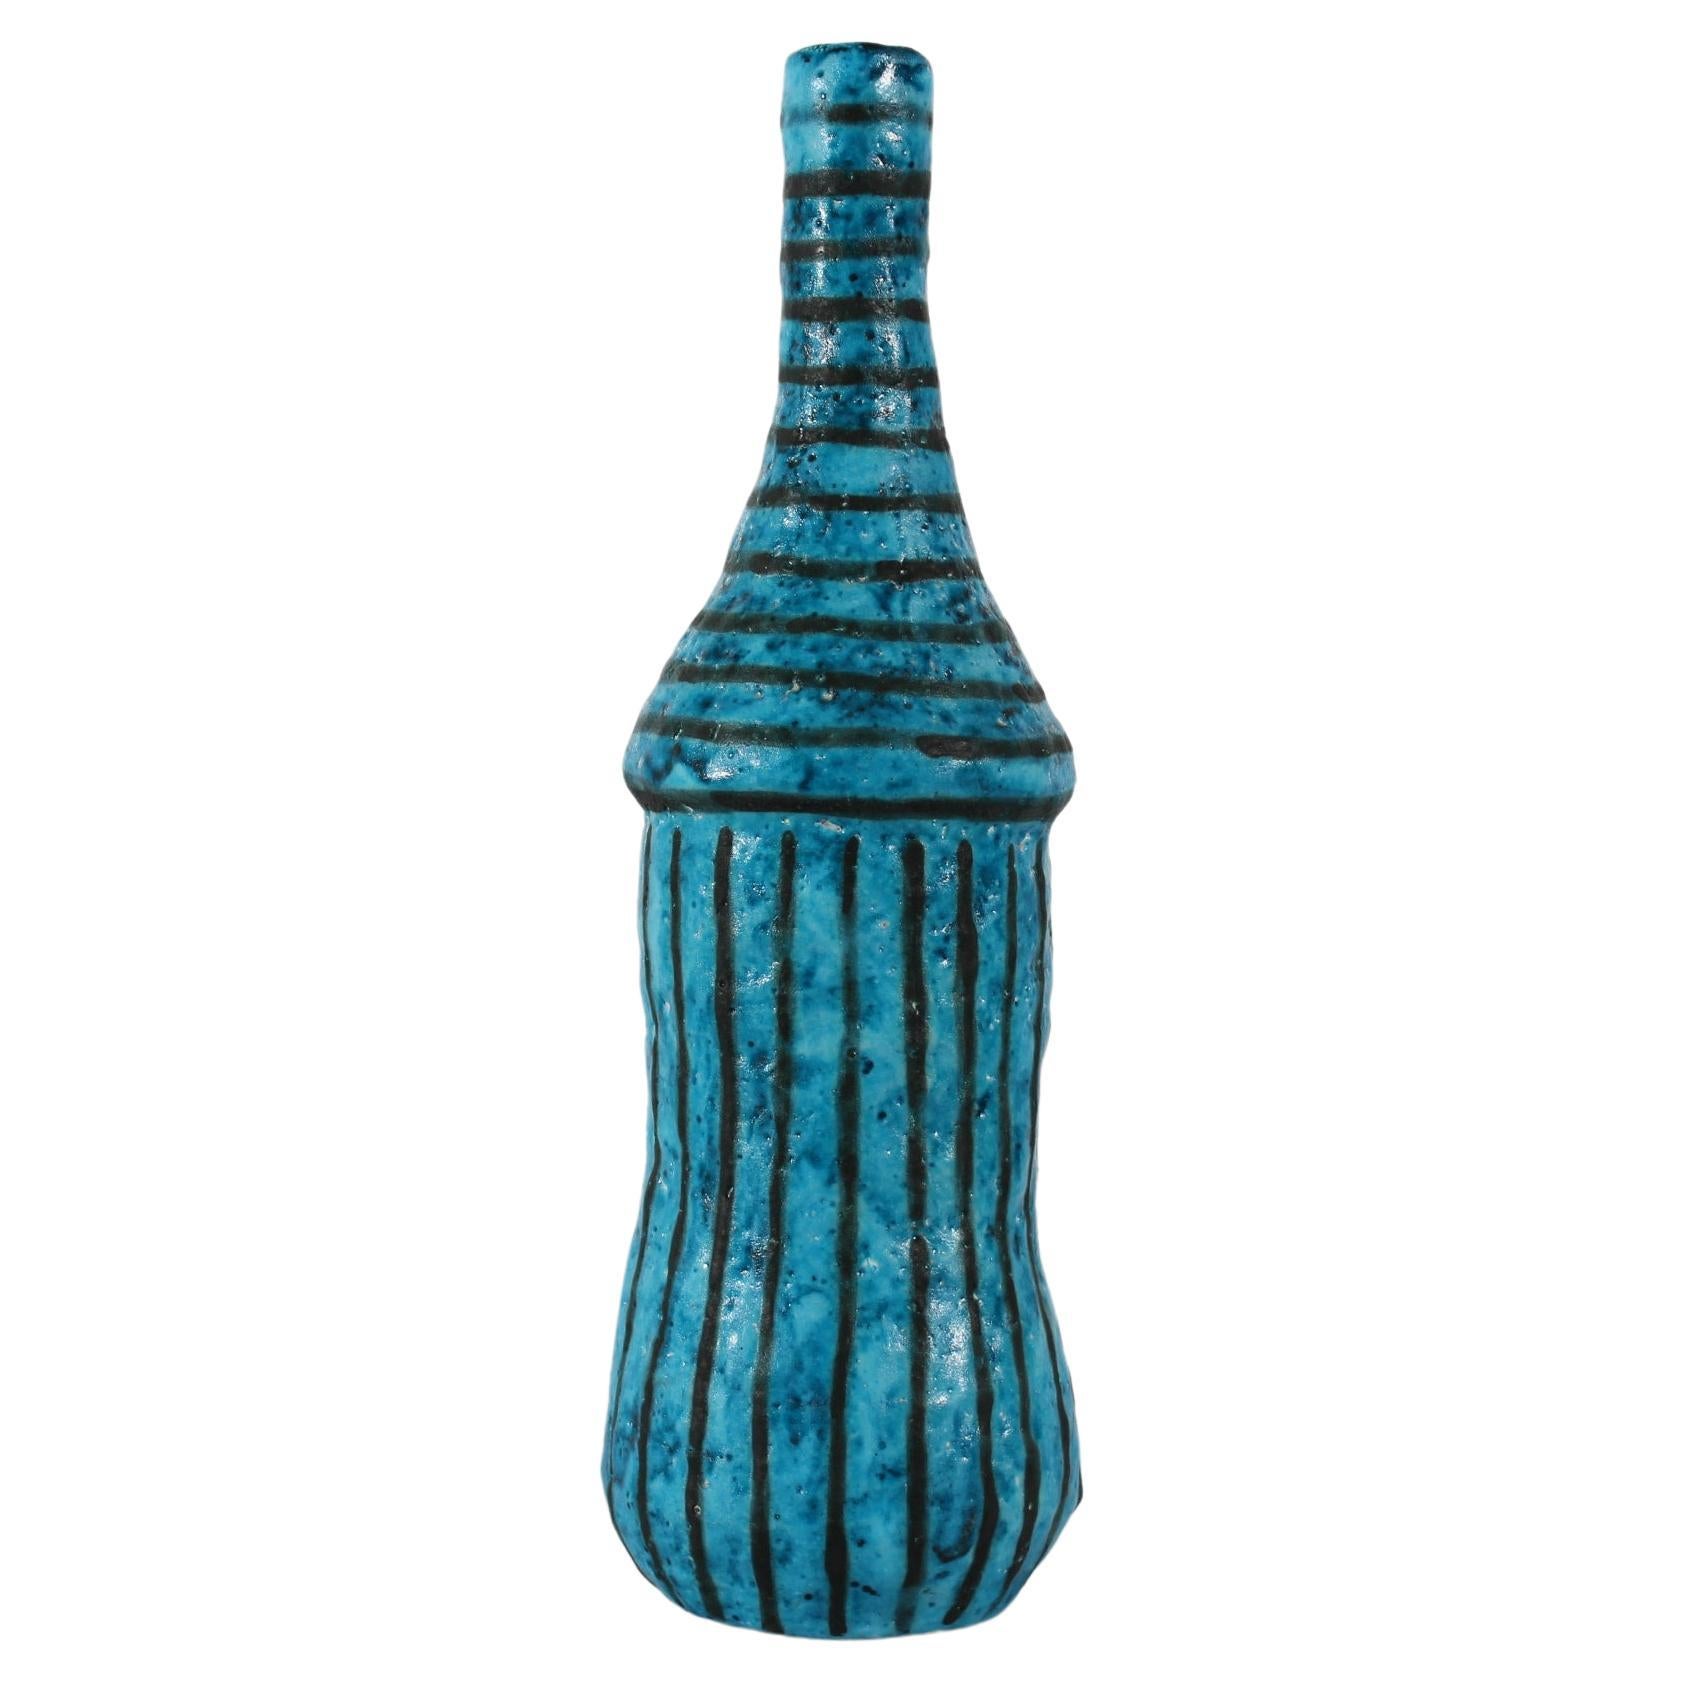 Tall and slim artistic bottle vase by Italian ceramist Guido Gambone (1909-1969), circa 1950´s.
The slightly asymmetric vase is decorated with matte turquoise glaze with black stripes.

Signed: Gambone Italy
Stamp with a deer for Guido

Very nice